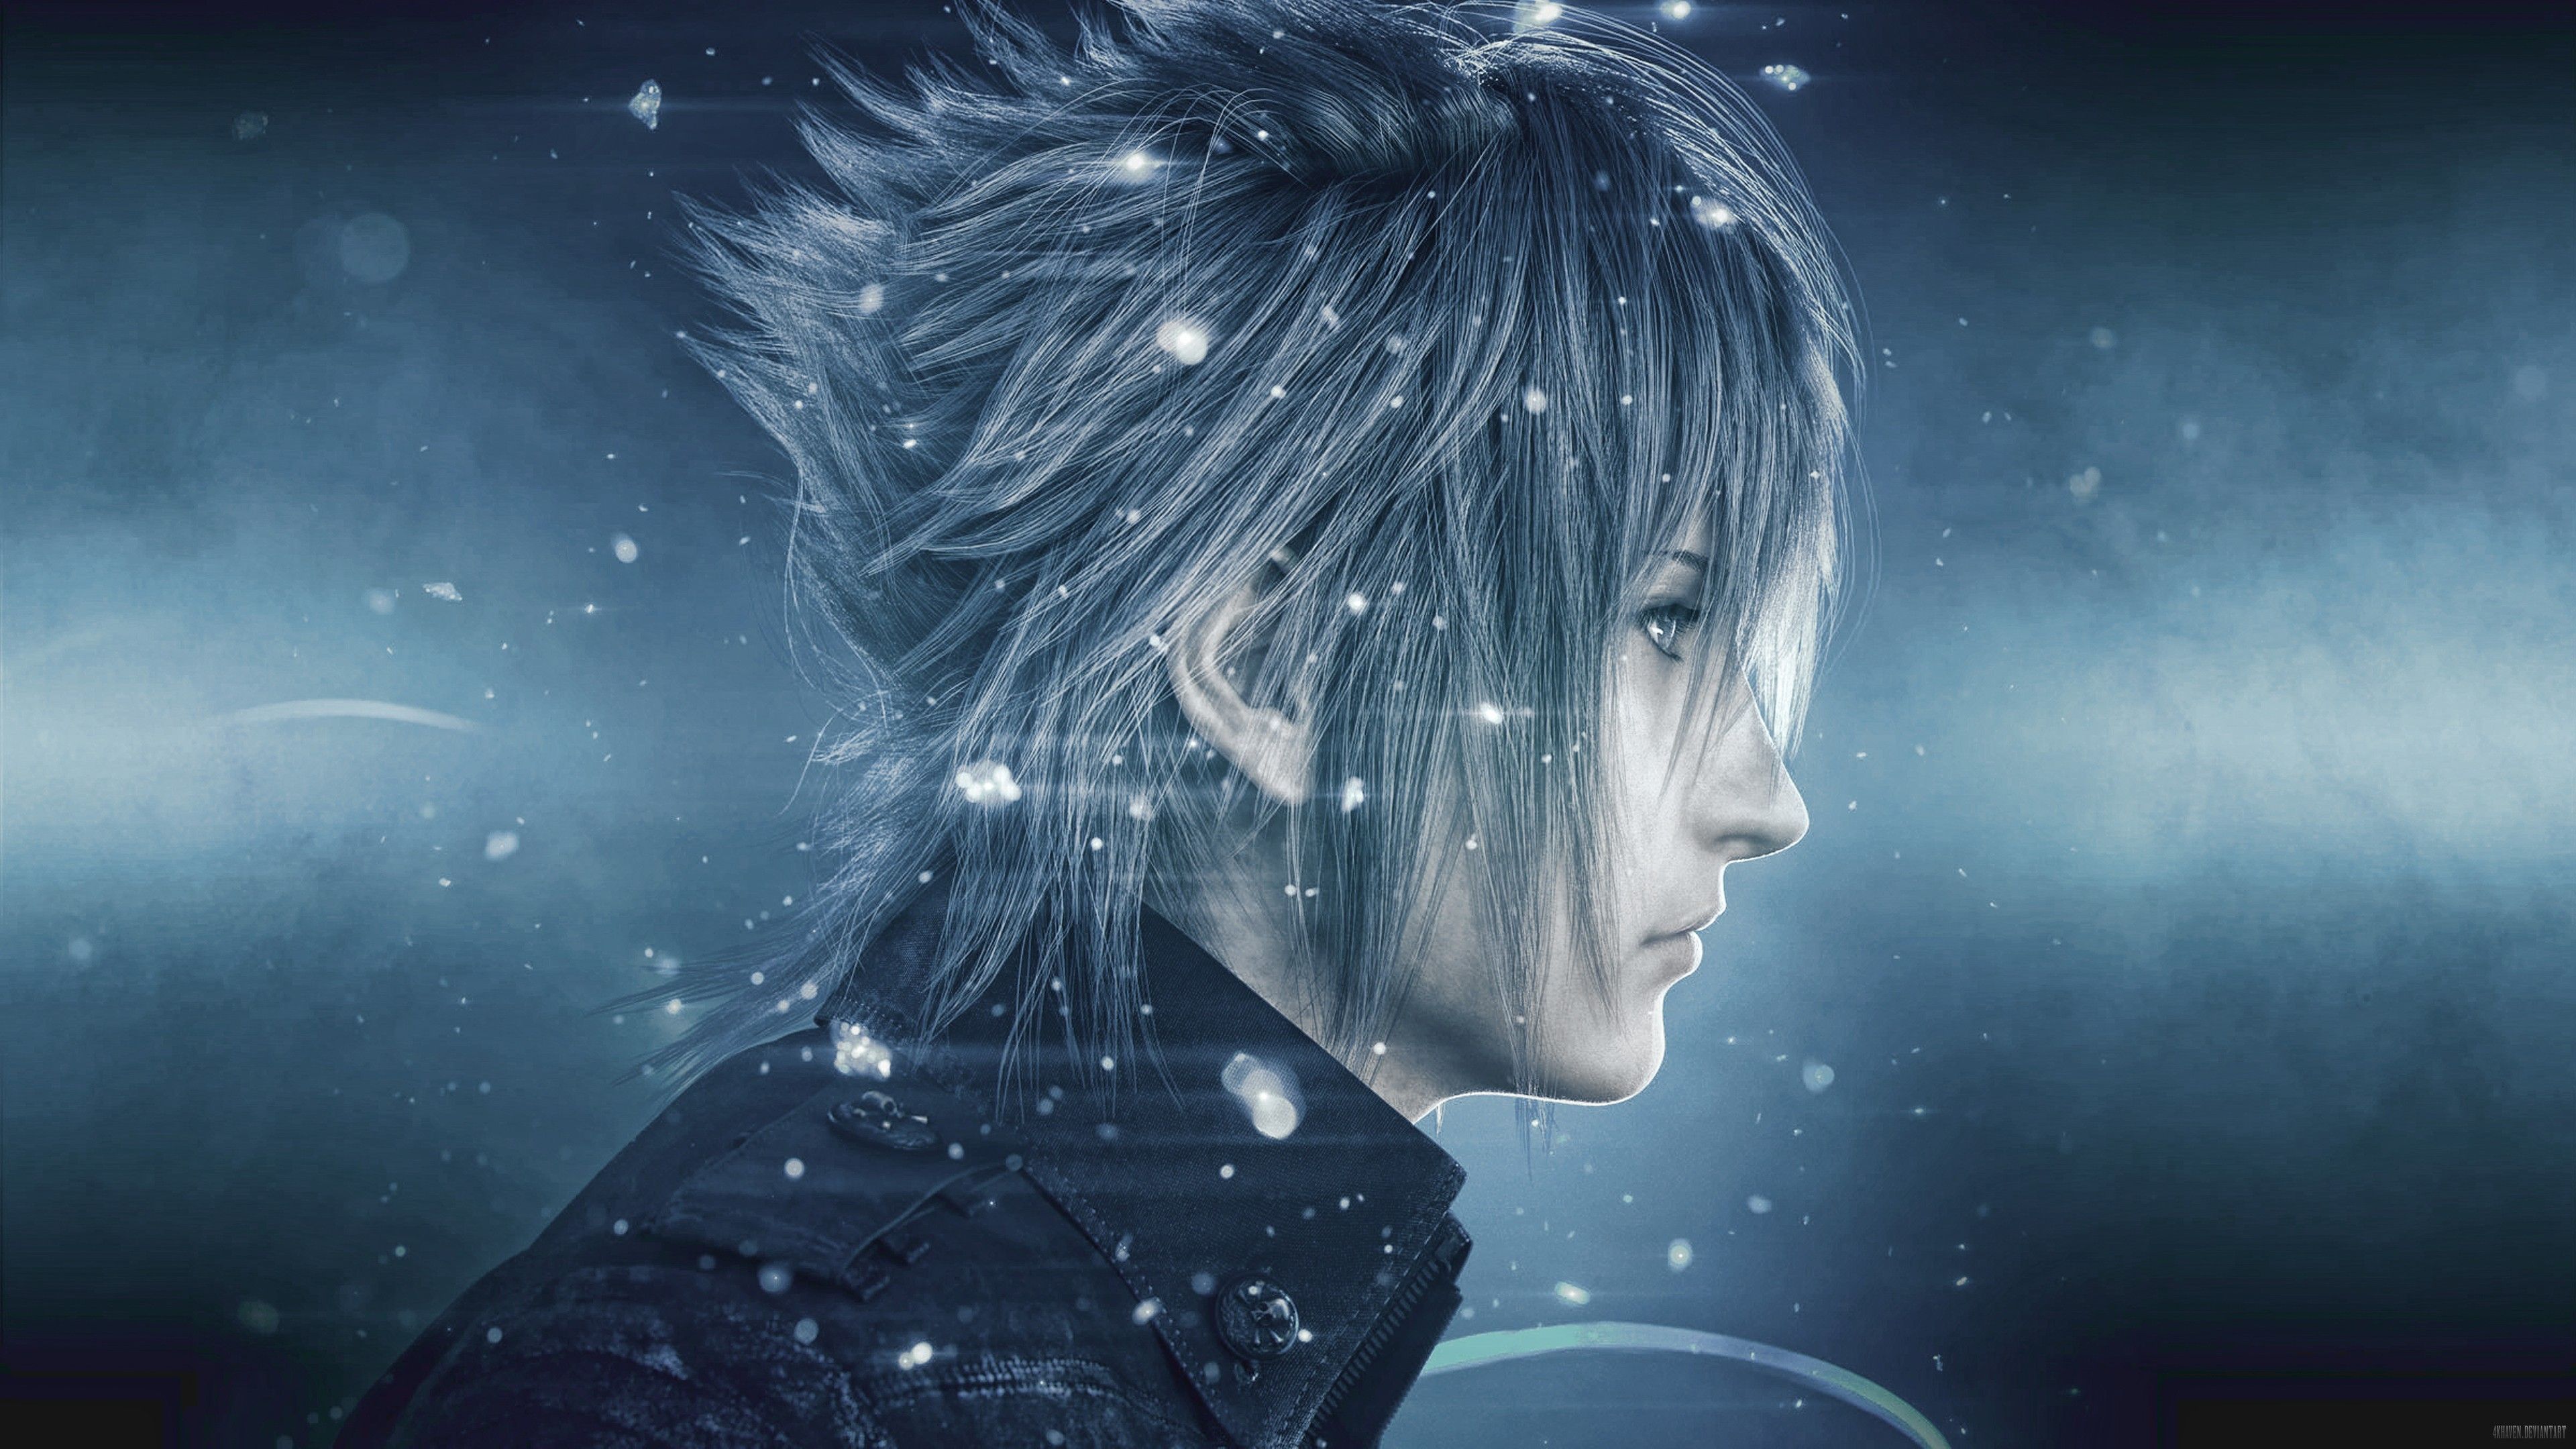 Final Fantasy XV Noctis, HD Games, 4k Wallpapers, Images, Backgrounds